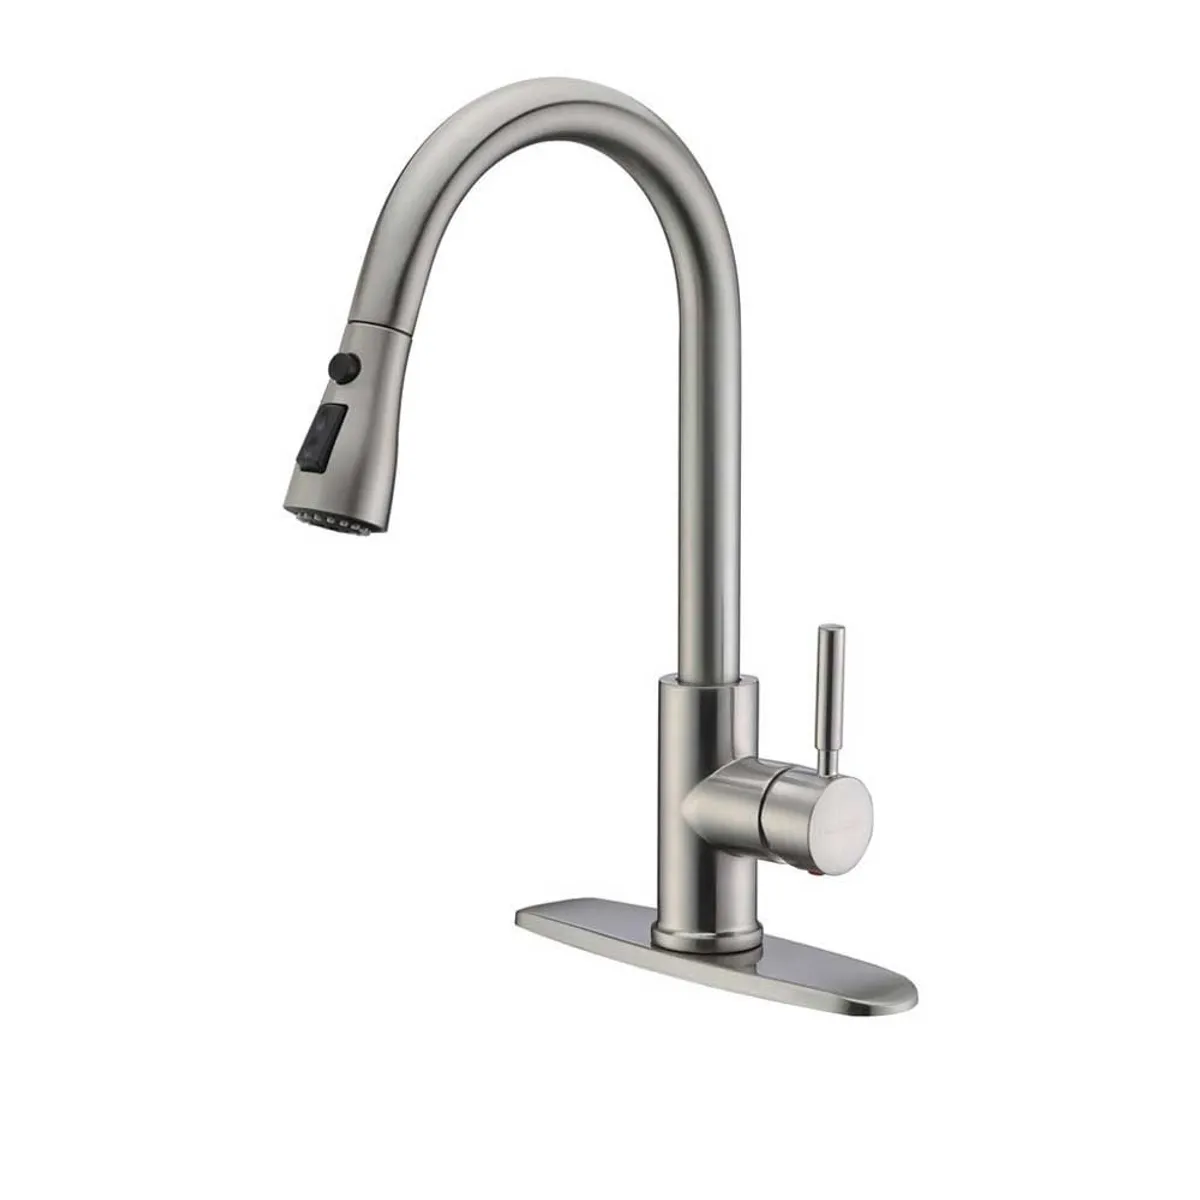 WEWE A1001L Kitchen Faucet Review